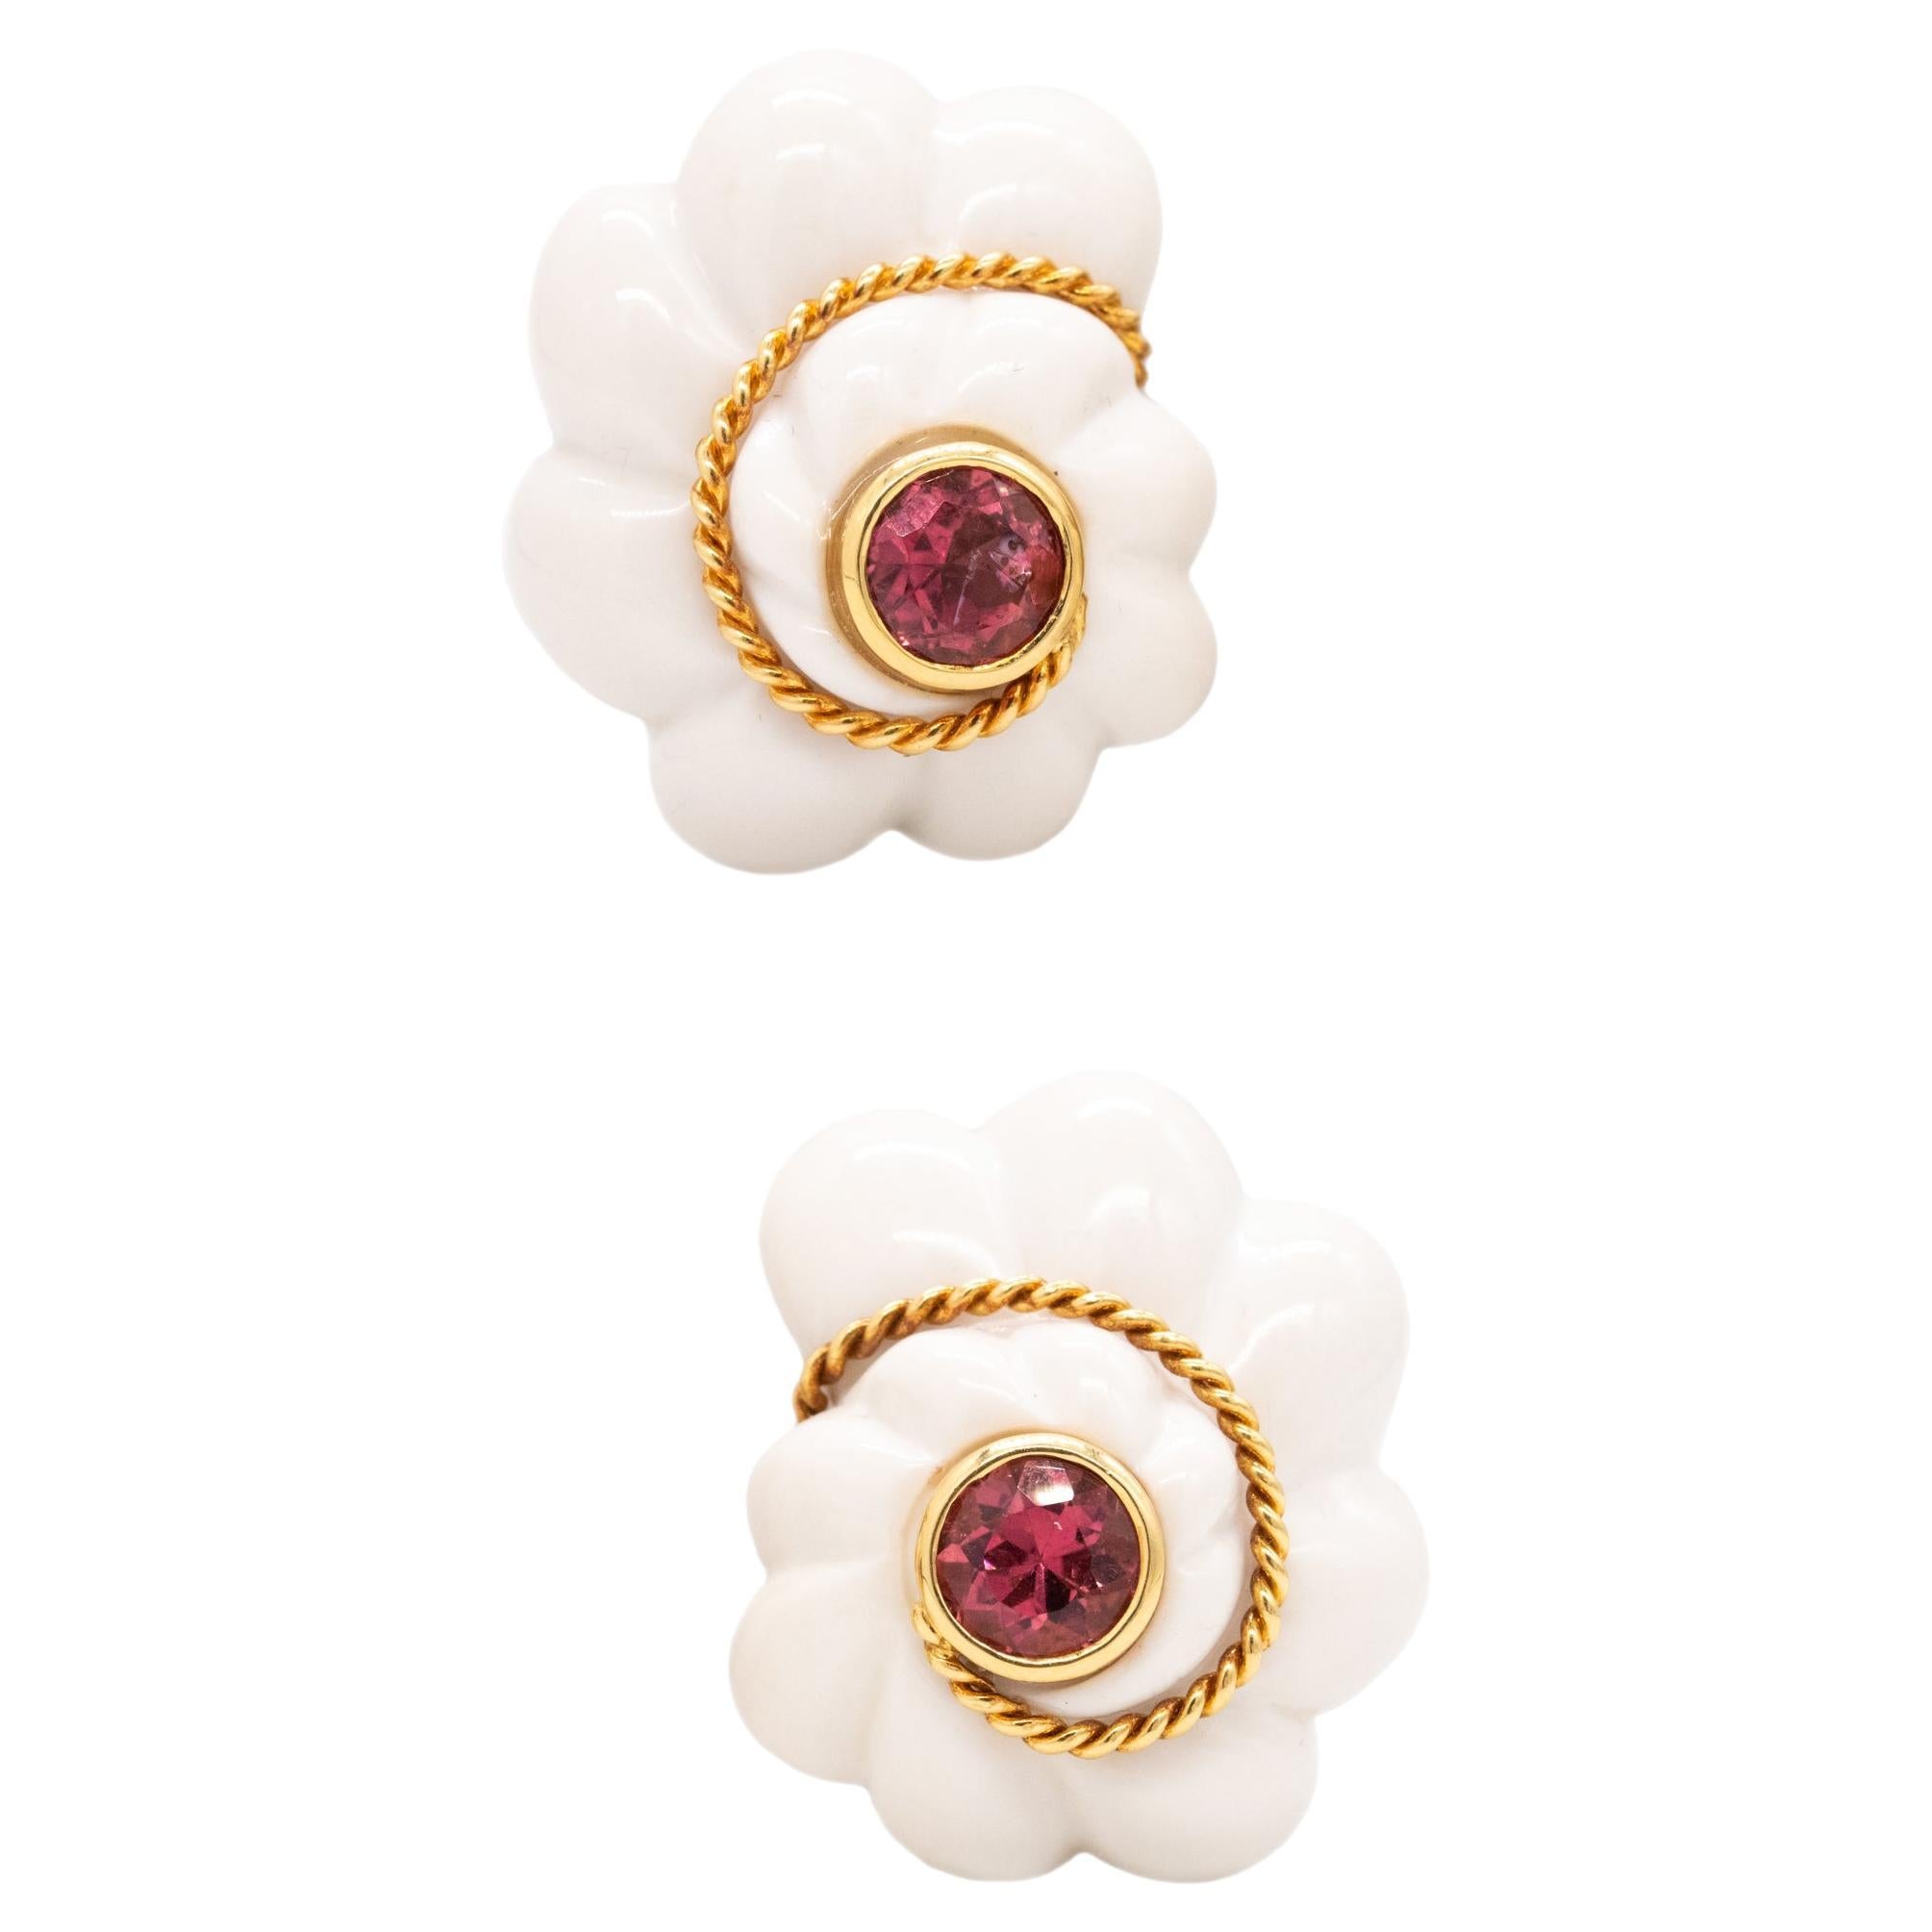 Valentin Magro 18Kt Gold Earrings 74.6 Cts In Rubellite And Cacholong White Opal For Sale